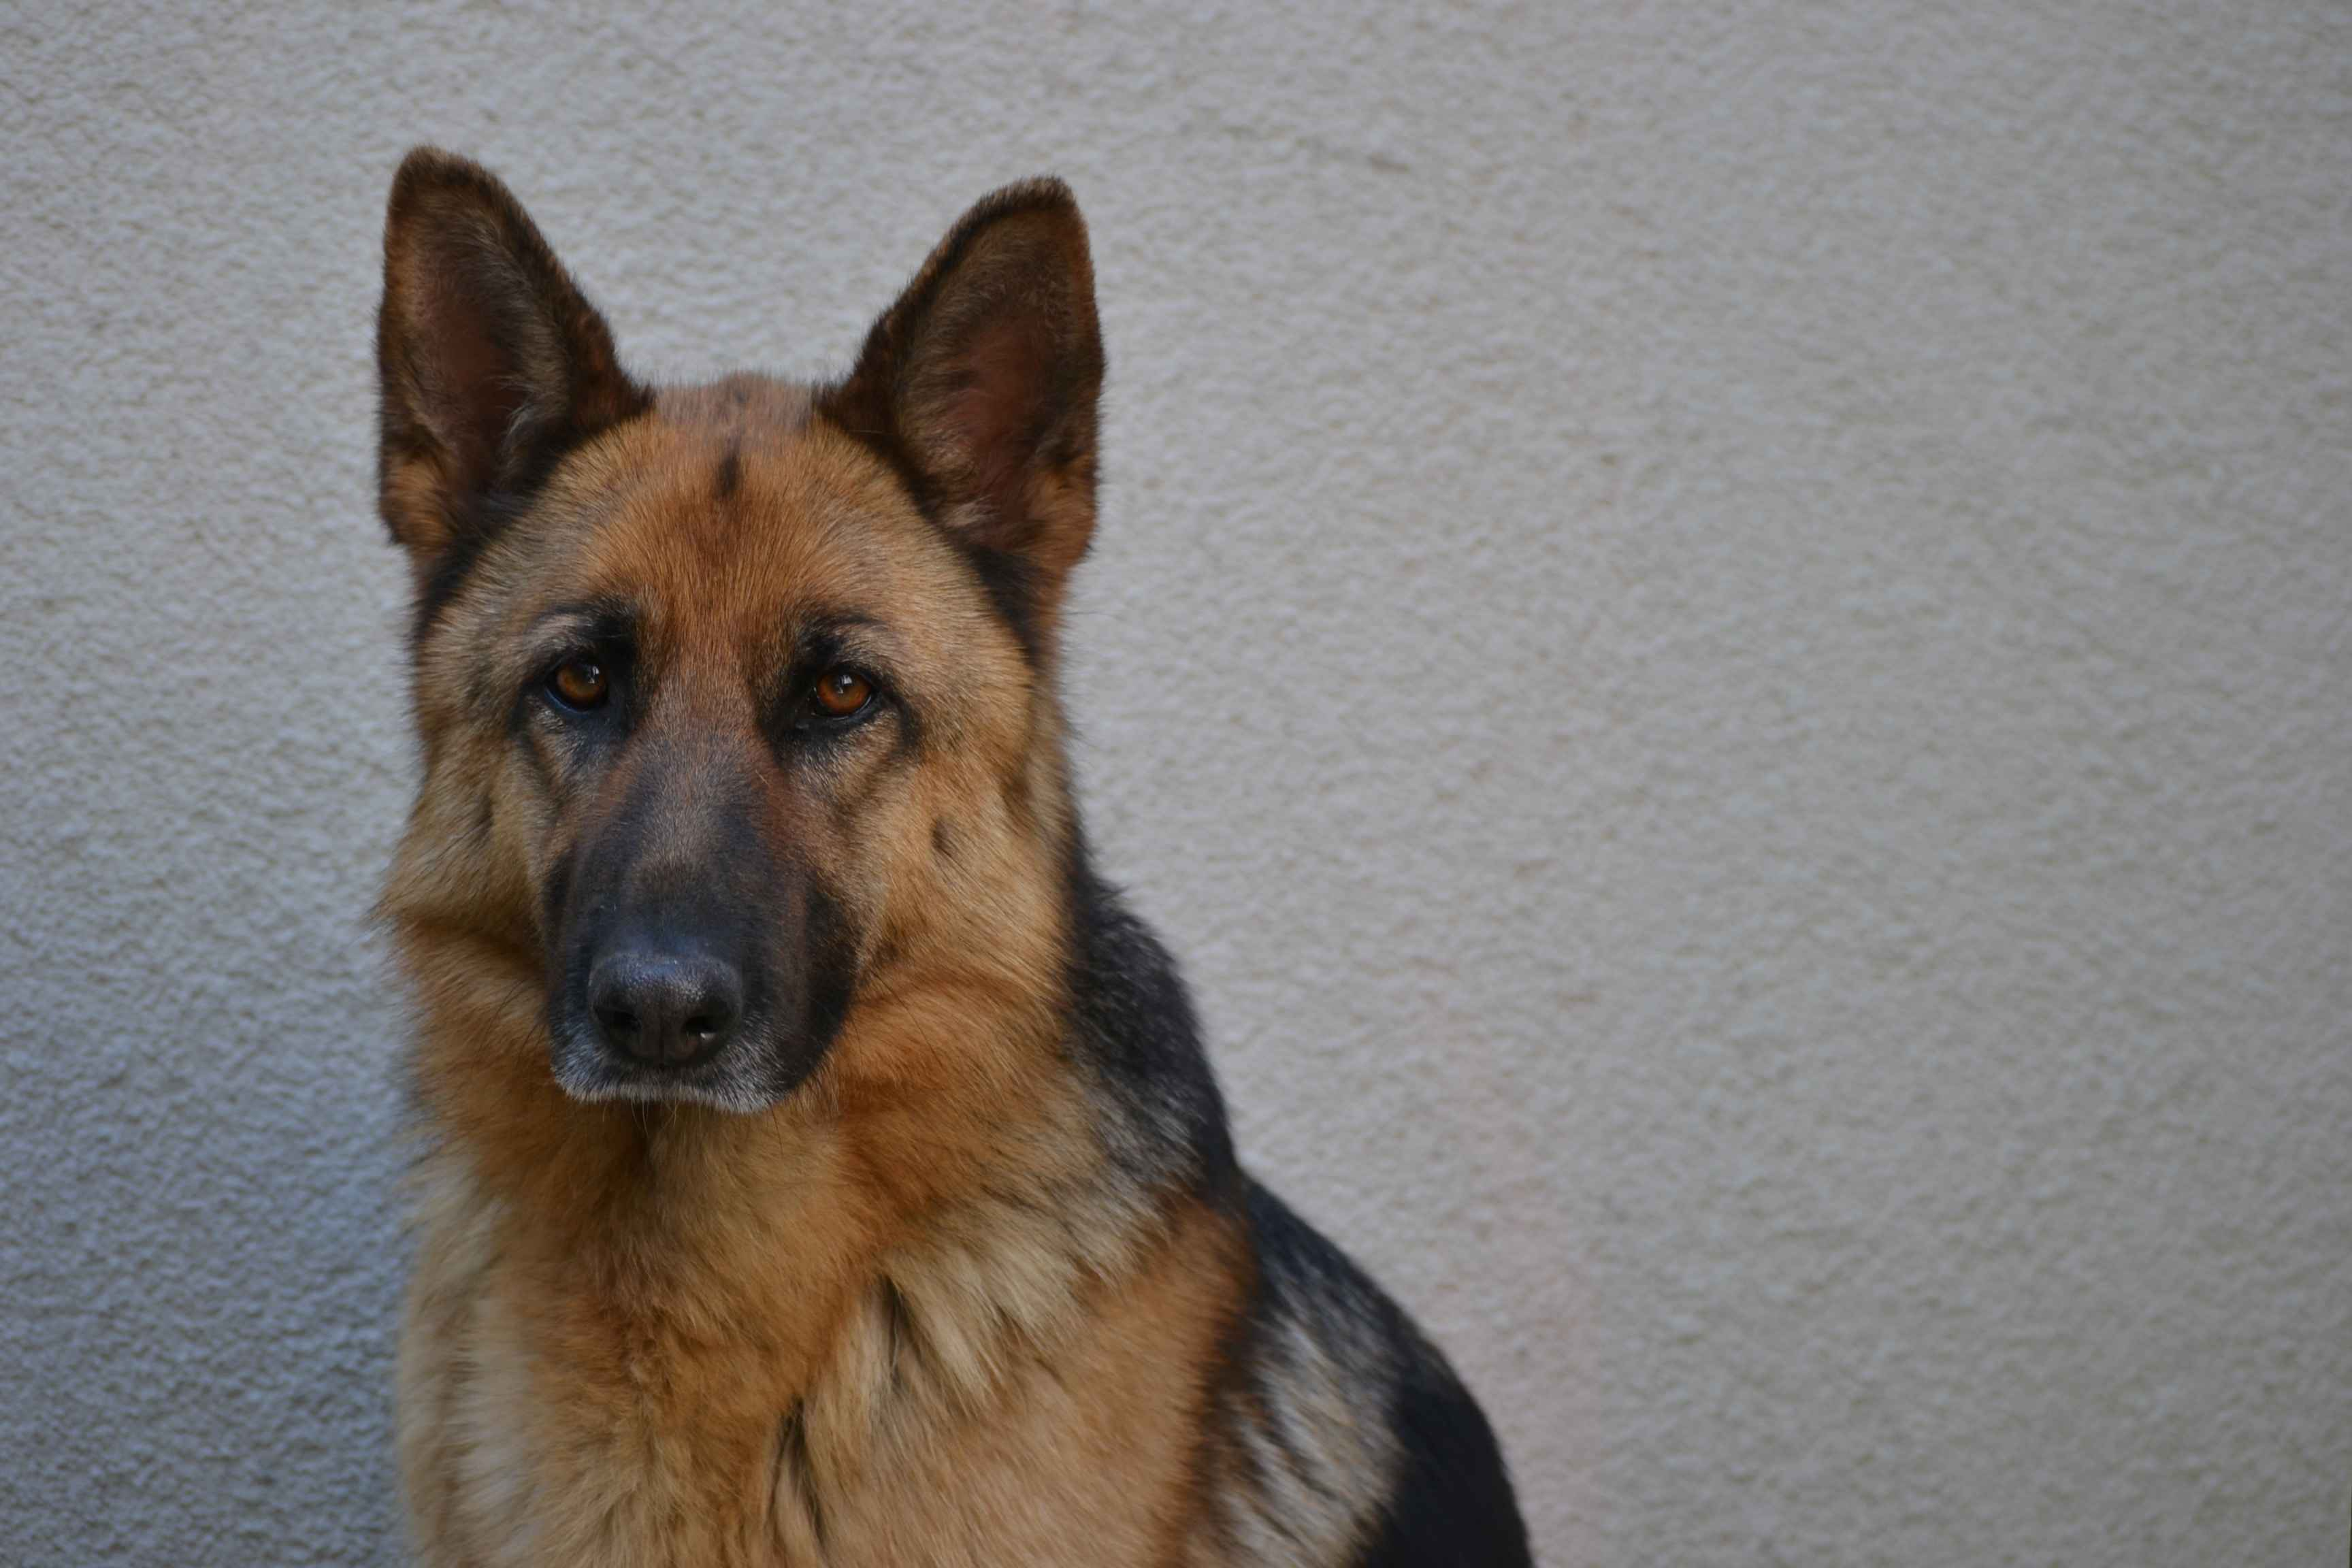 What is the best way to prevent aggression towards other animals in a German shepherd?